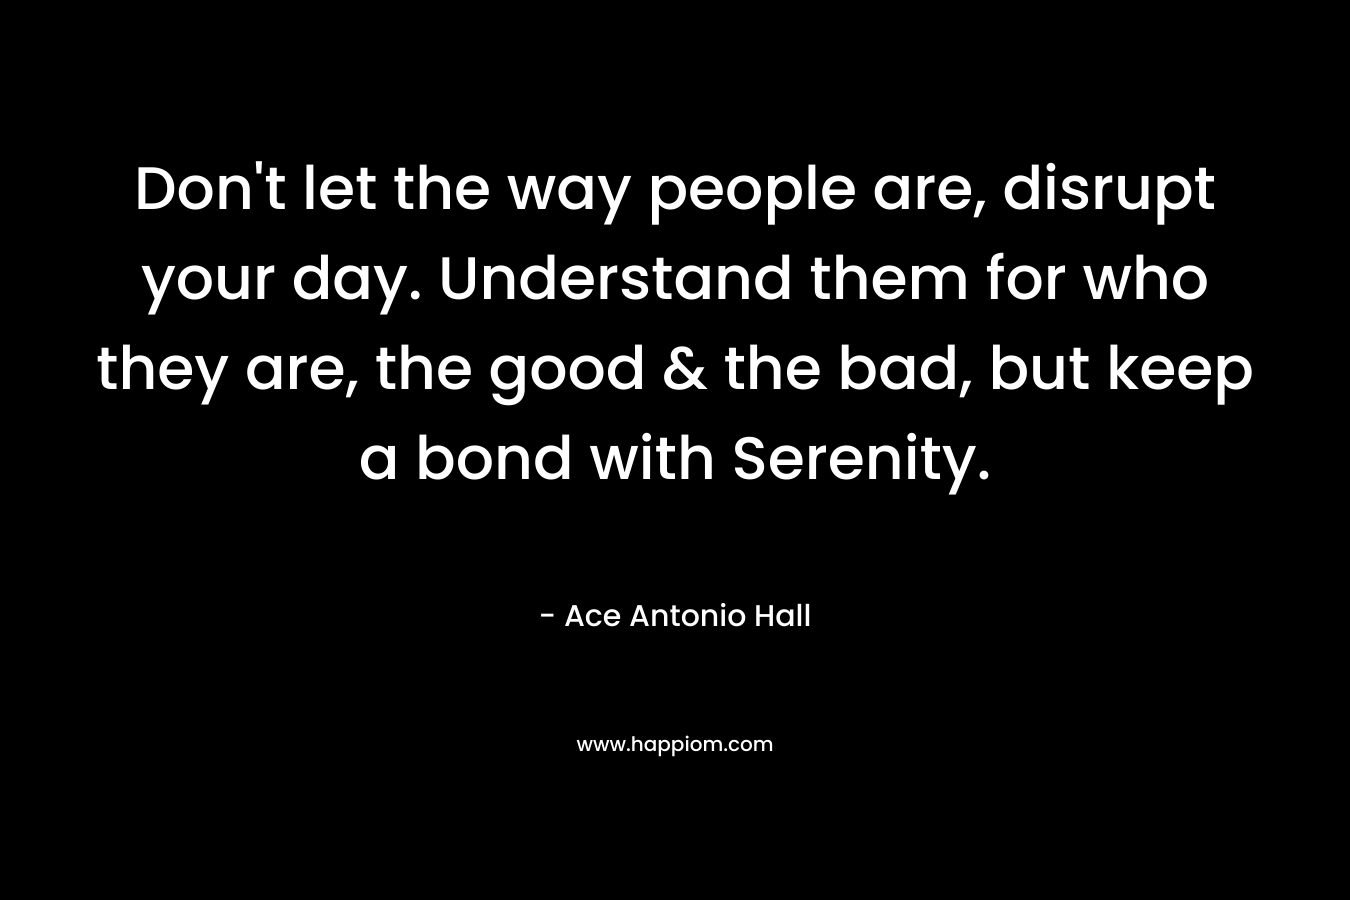 Don’t let the way people are, disrupt your day. Understand them for who they are, the good & the bad, but keep a bond with Serenity. – Ace Antonio Hall